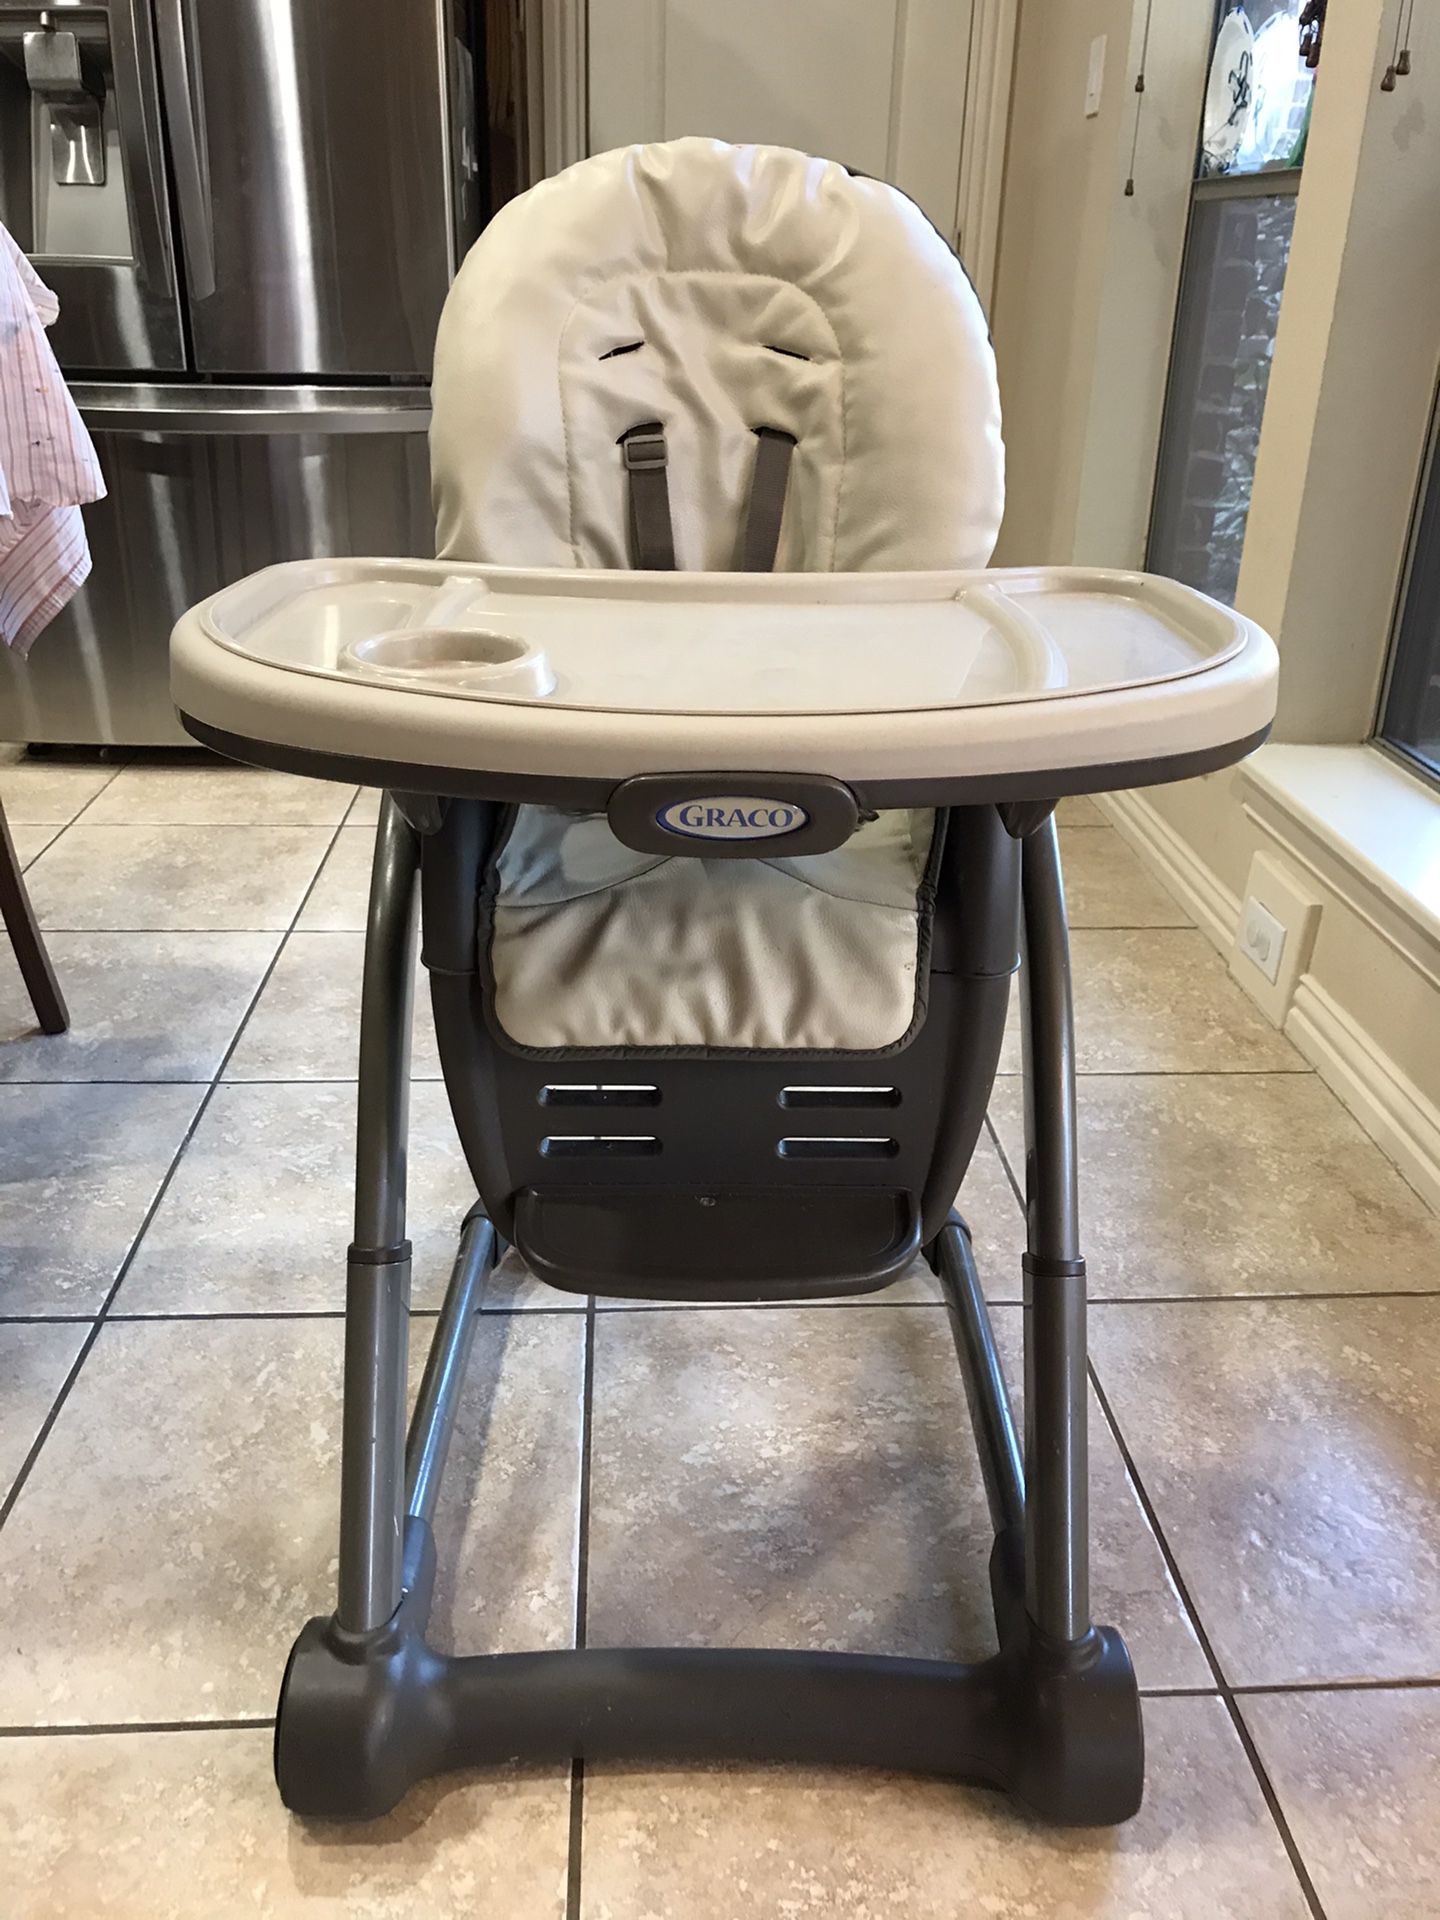 Graco 6in1 convertible high chair